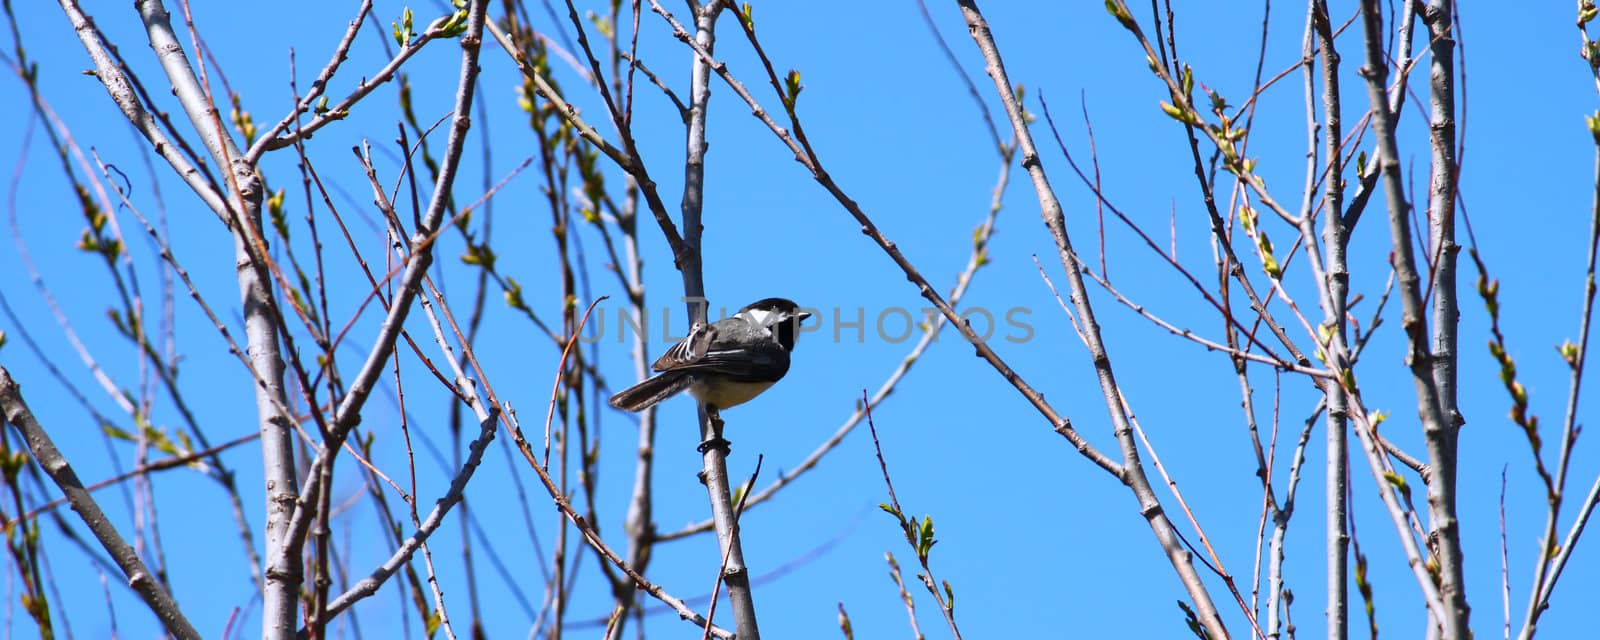 Black-capped Chickadee (Poecile atricapillus) by Wirepec